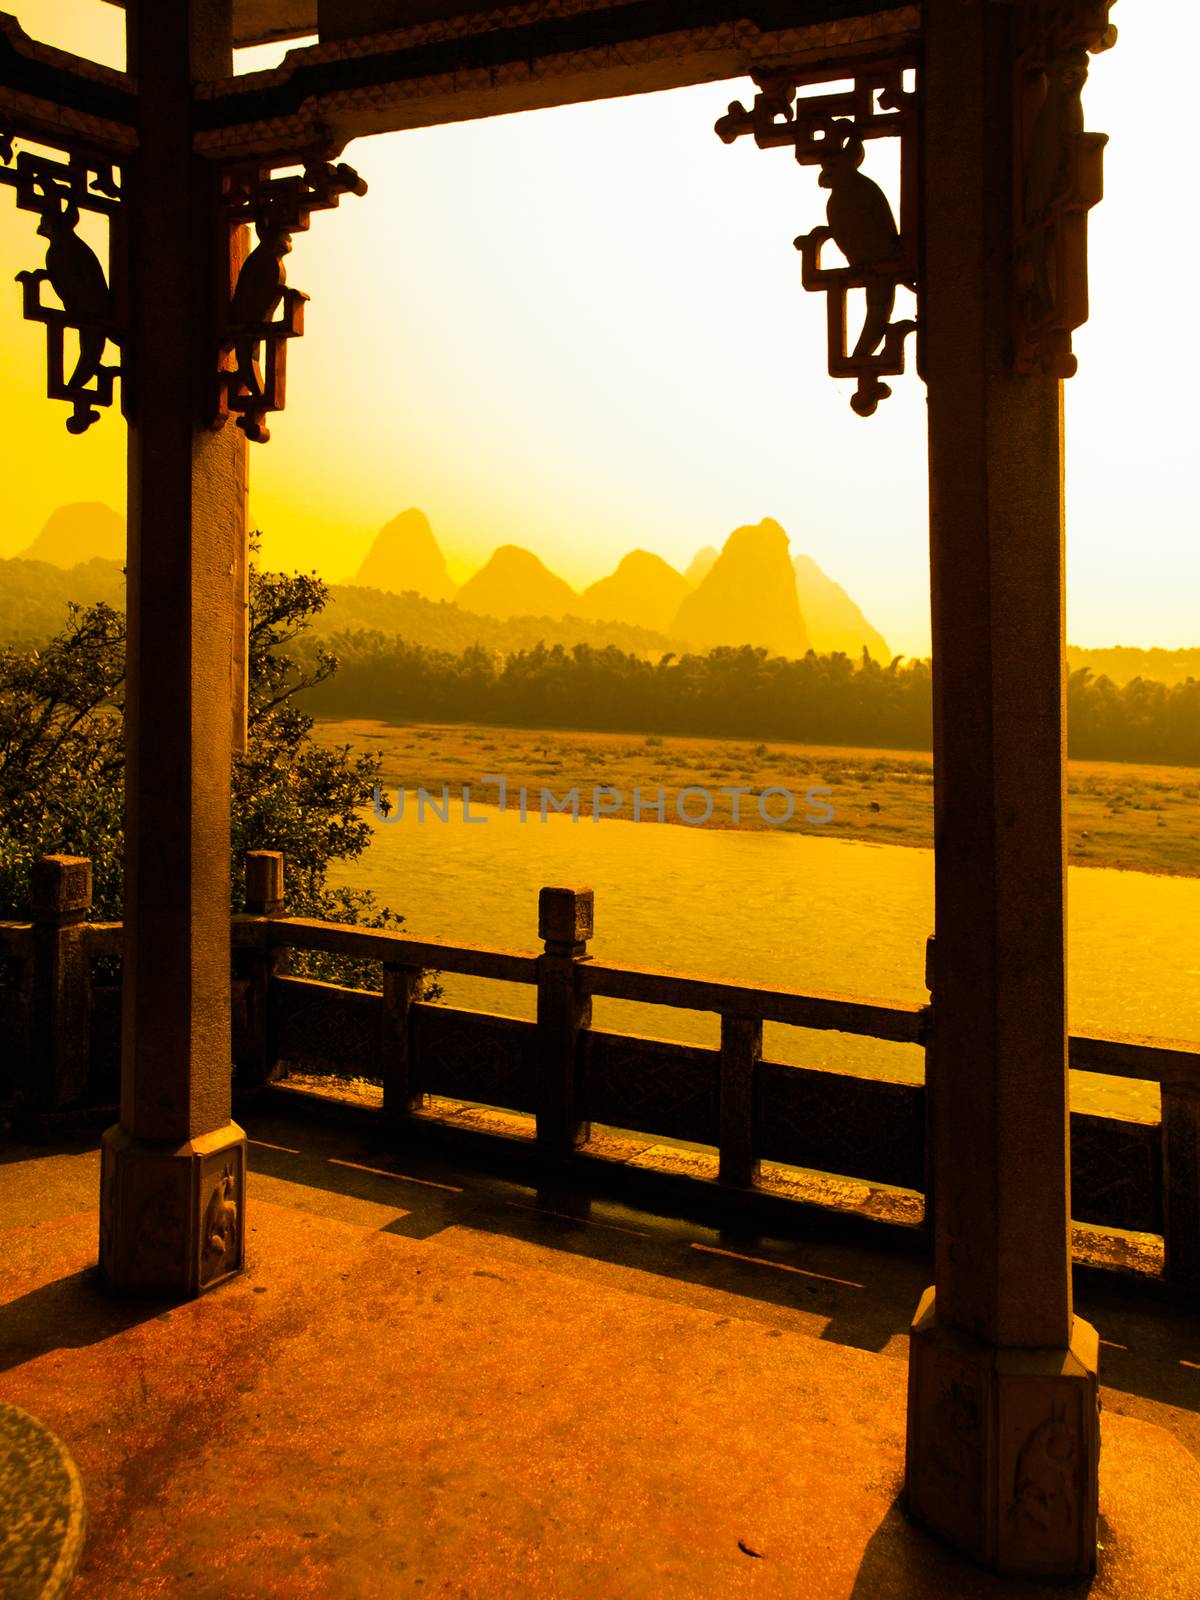 Sunset in karst landscape around Yangshuo an Li River with peaks silhouettes, Guangxi Province, China. View from terrace with ornamental columns by pyty